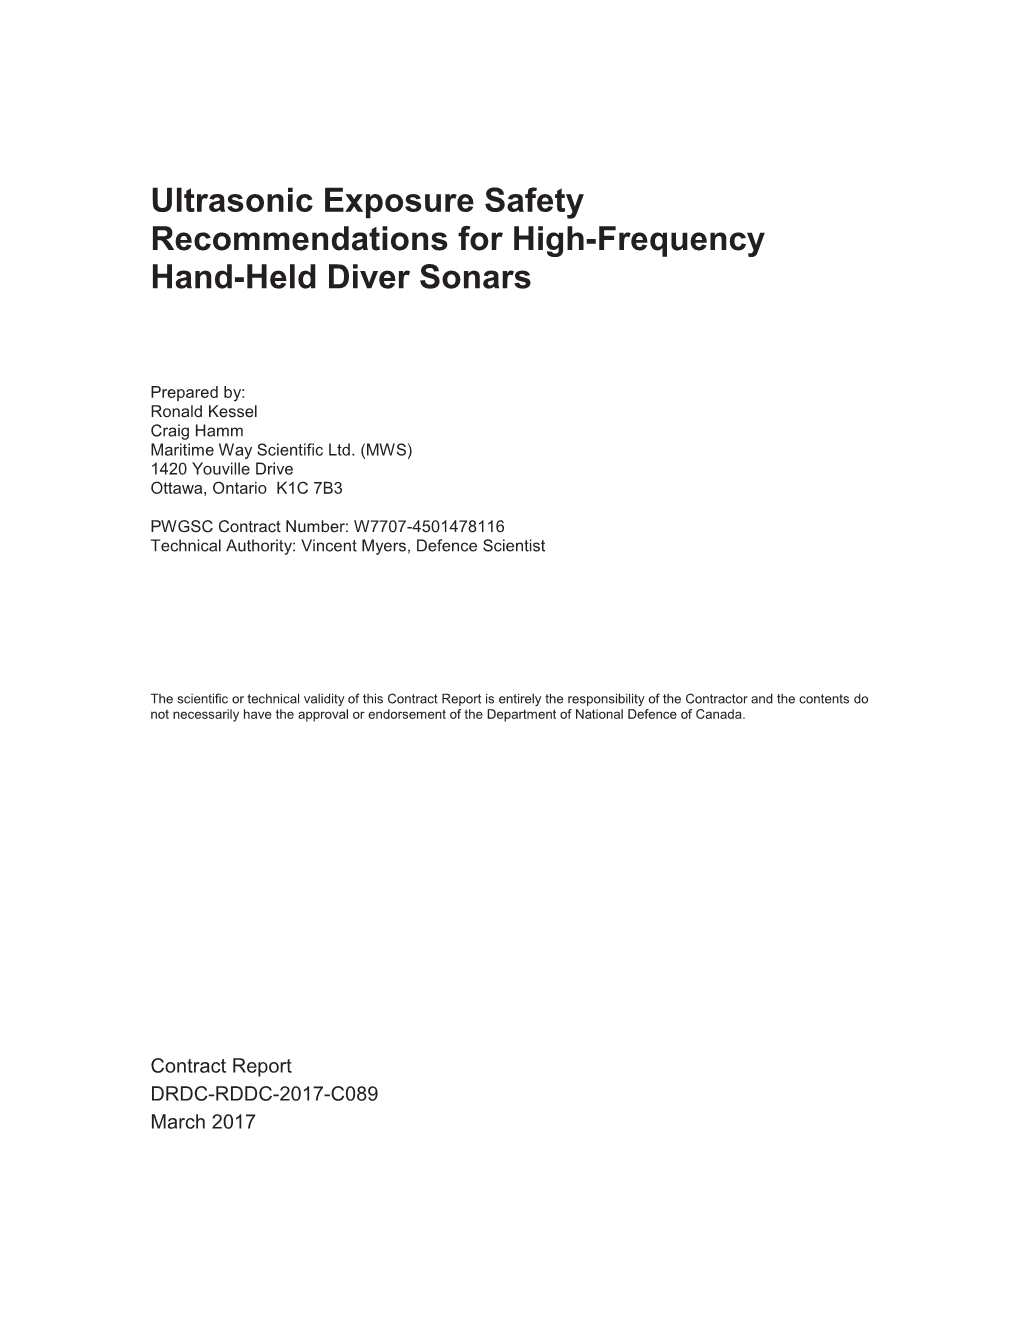 Ultrasonic Exposure Safety Recommendations for High-Frequency Hand-Held Diver Sonars